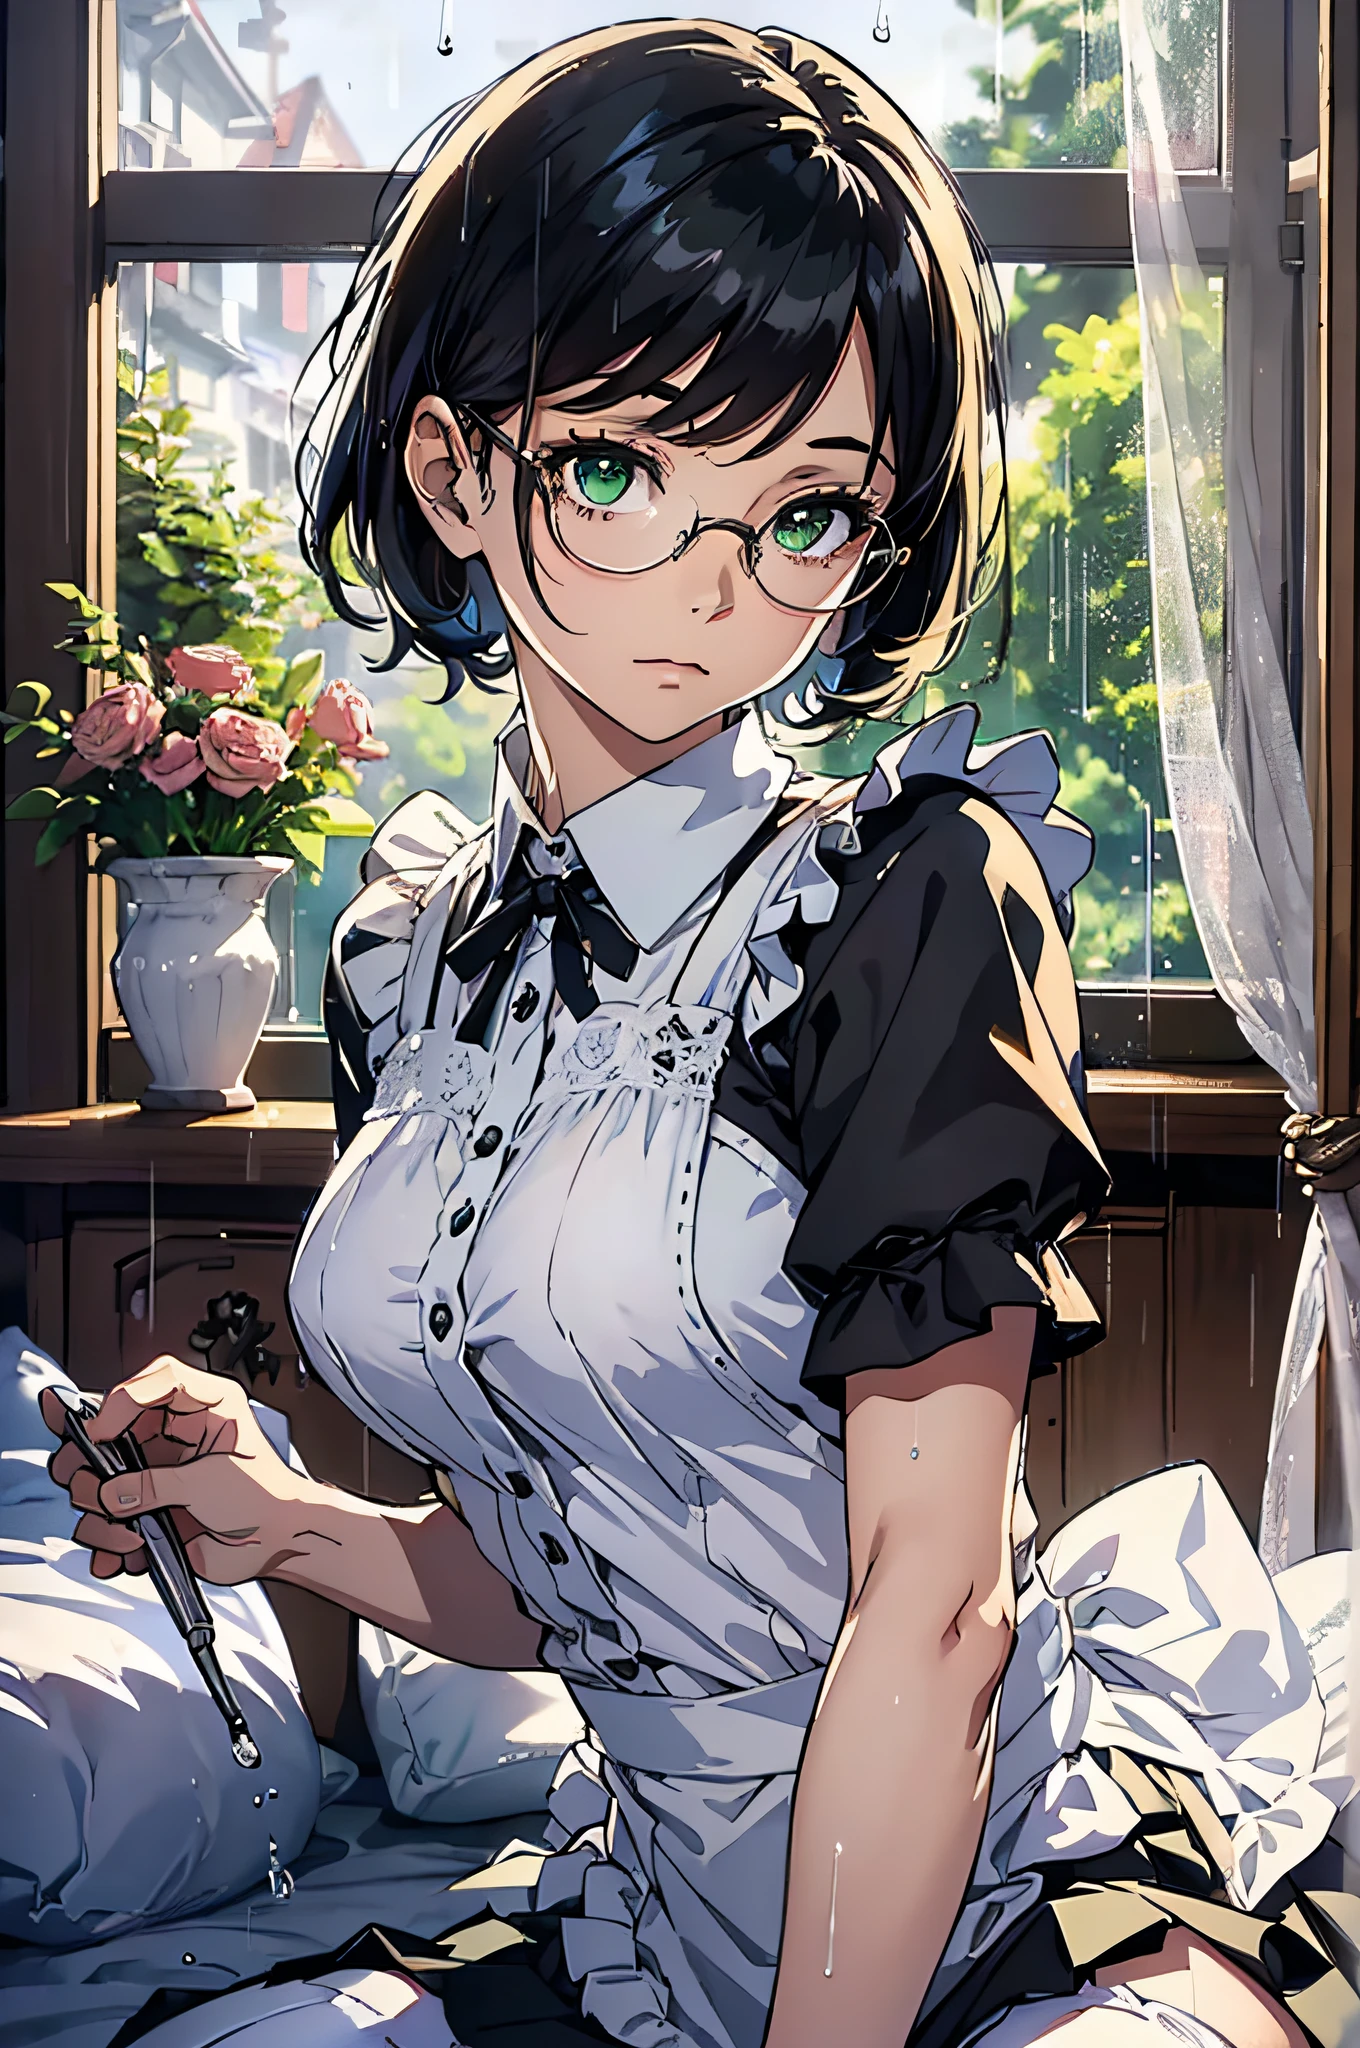 Masterpiece, best quality, 8k, fine details, detailed face, detailed hair, 1 girl, (black hair), Japanese maid outfit, white suspender stockings, slender figure, short hair, (beautiful girl), Lift the maid skirt from the front, cute, tangled expression, upper body, (green eyes), with glasses, looking down, looking down, windows, night, raindrops, shadows, rain, bedroom, bed, curtains, flowers, clocks, exquisite interior design,